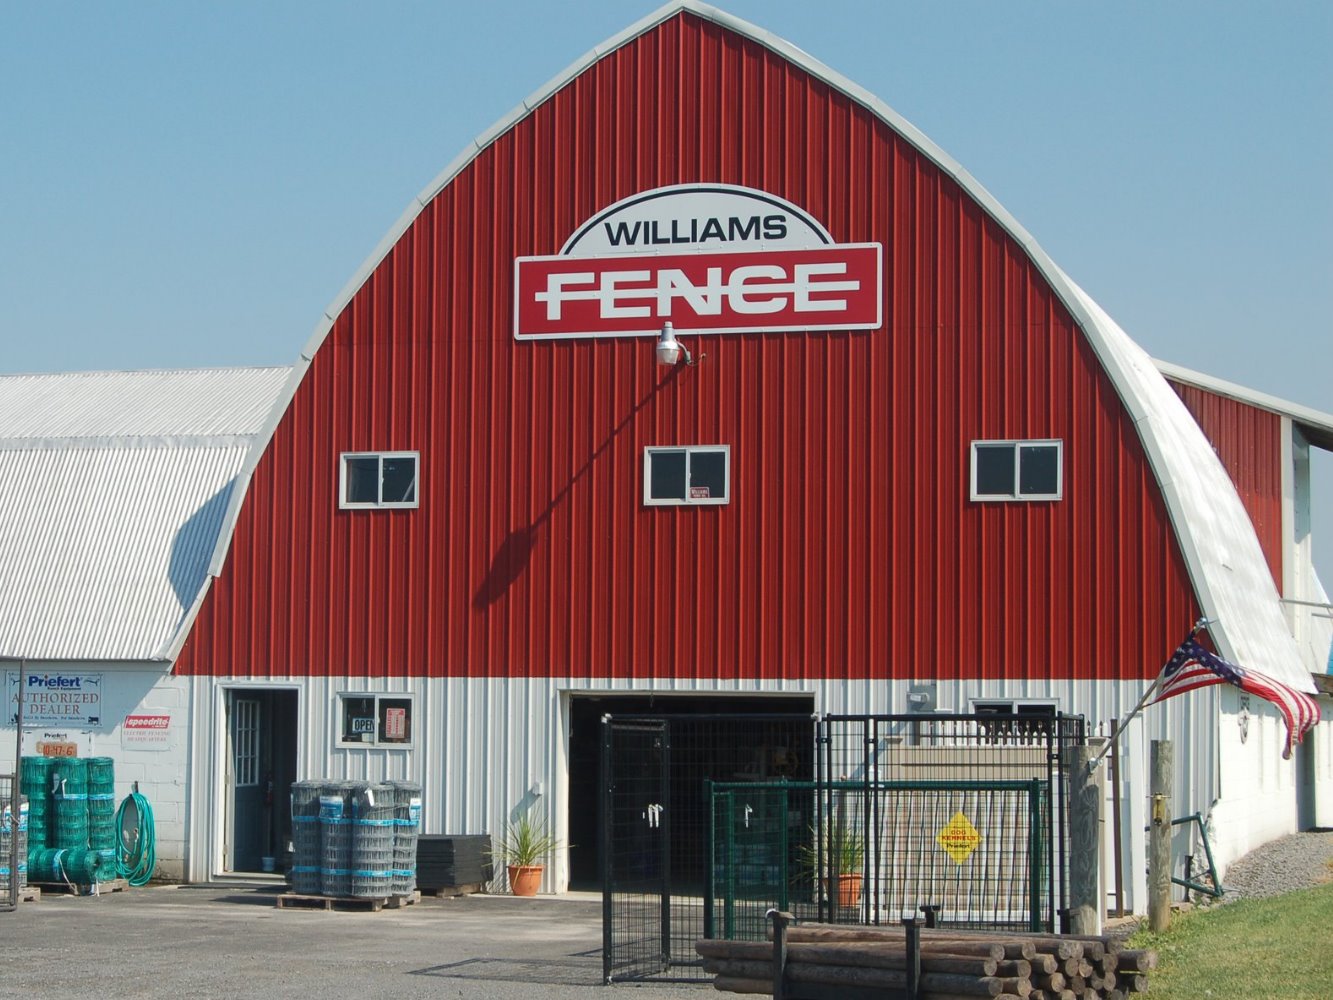 The Williams Fence Difference in Rome New York Fence Installations